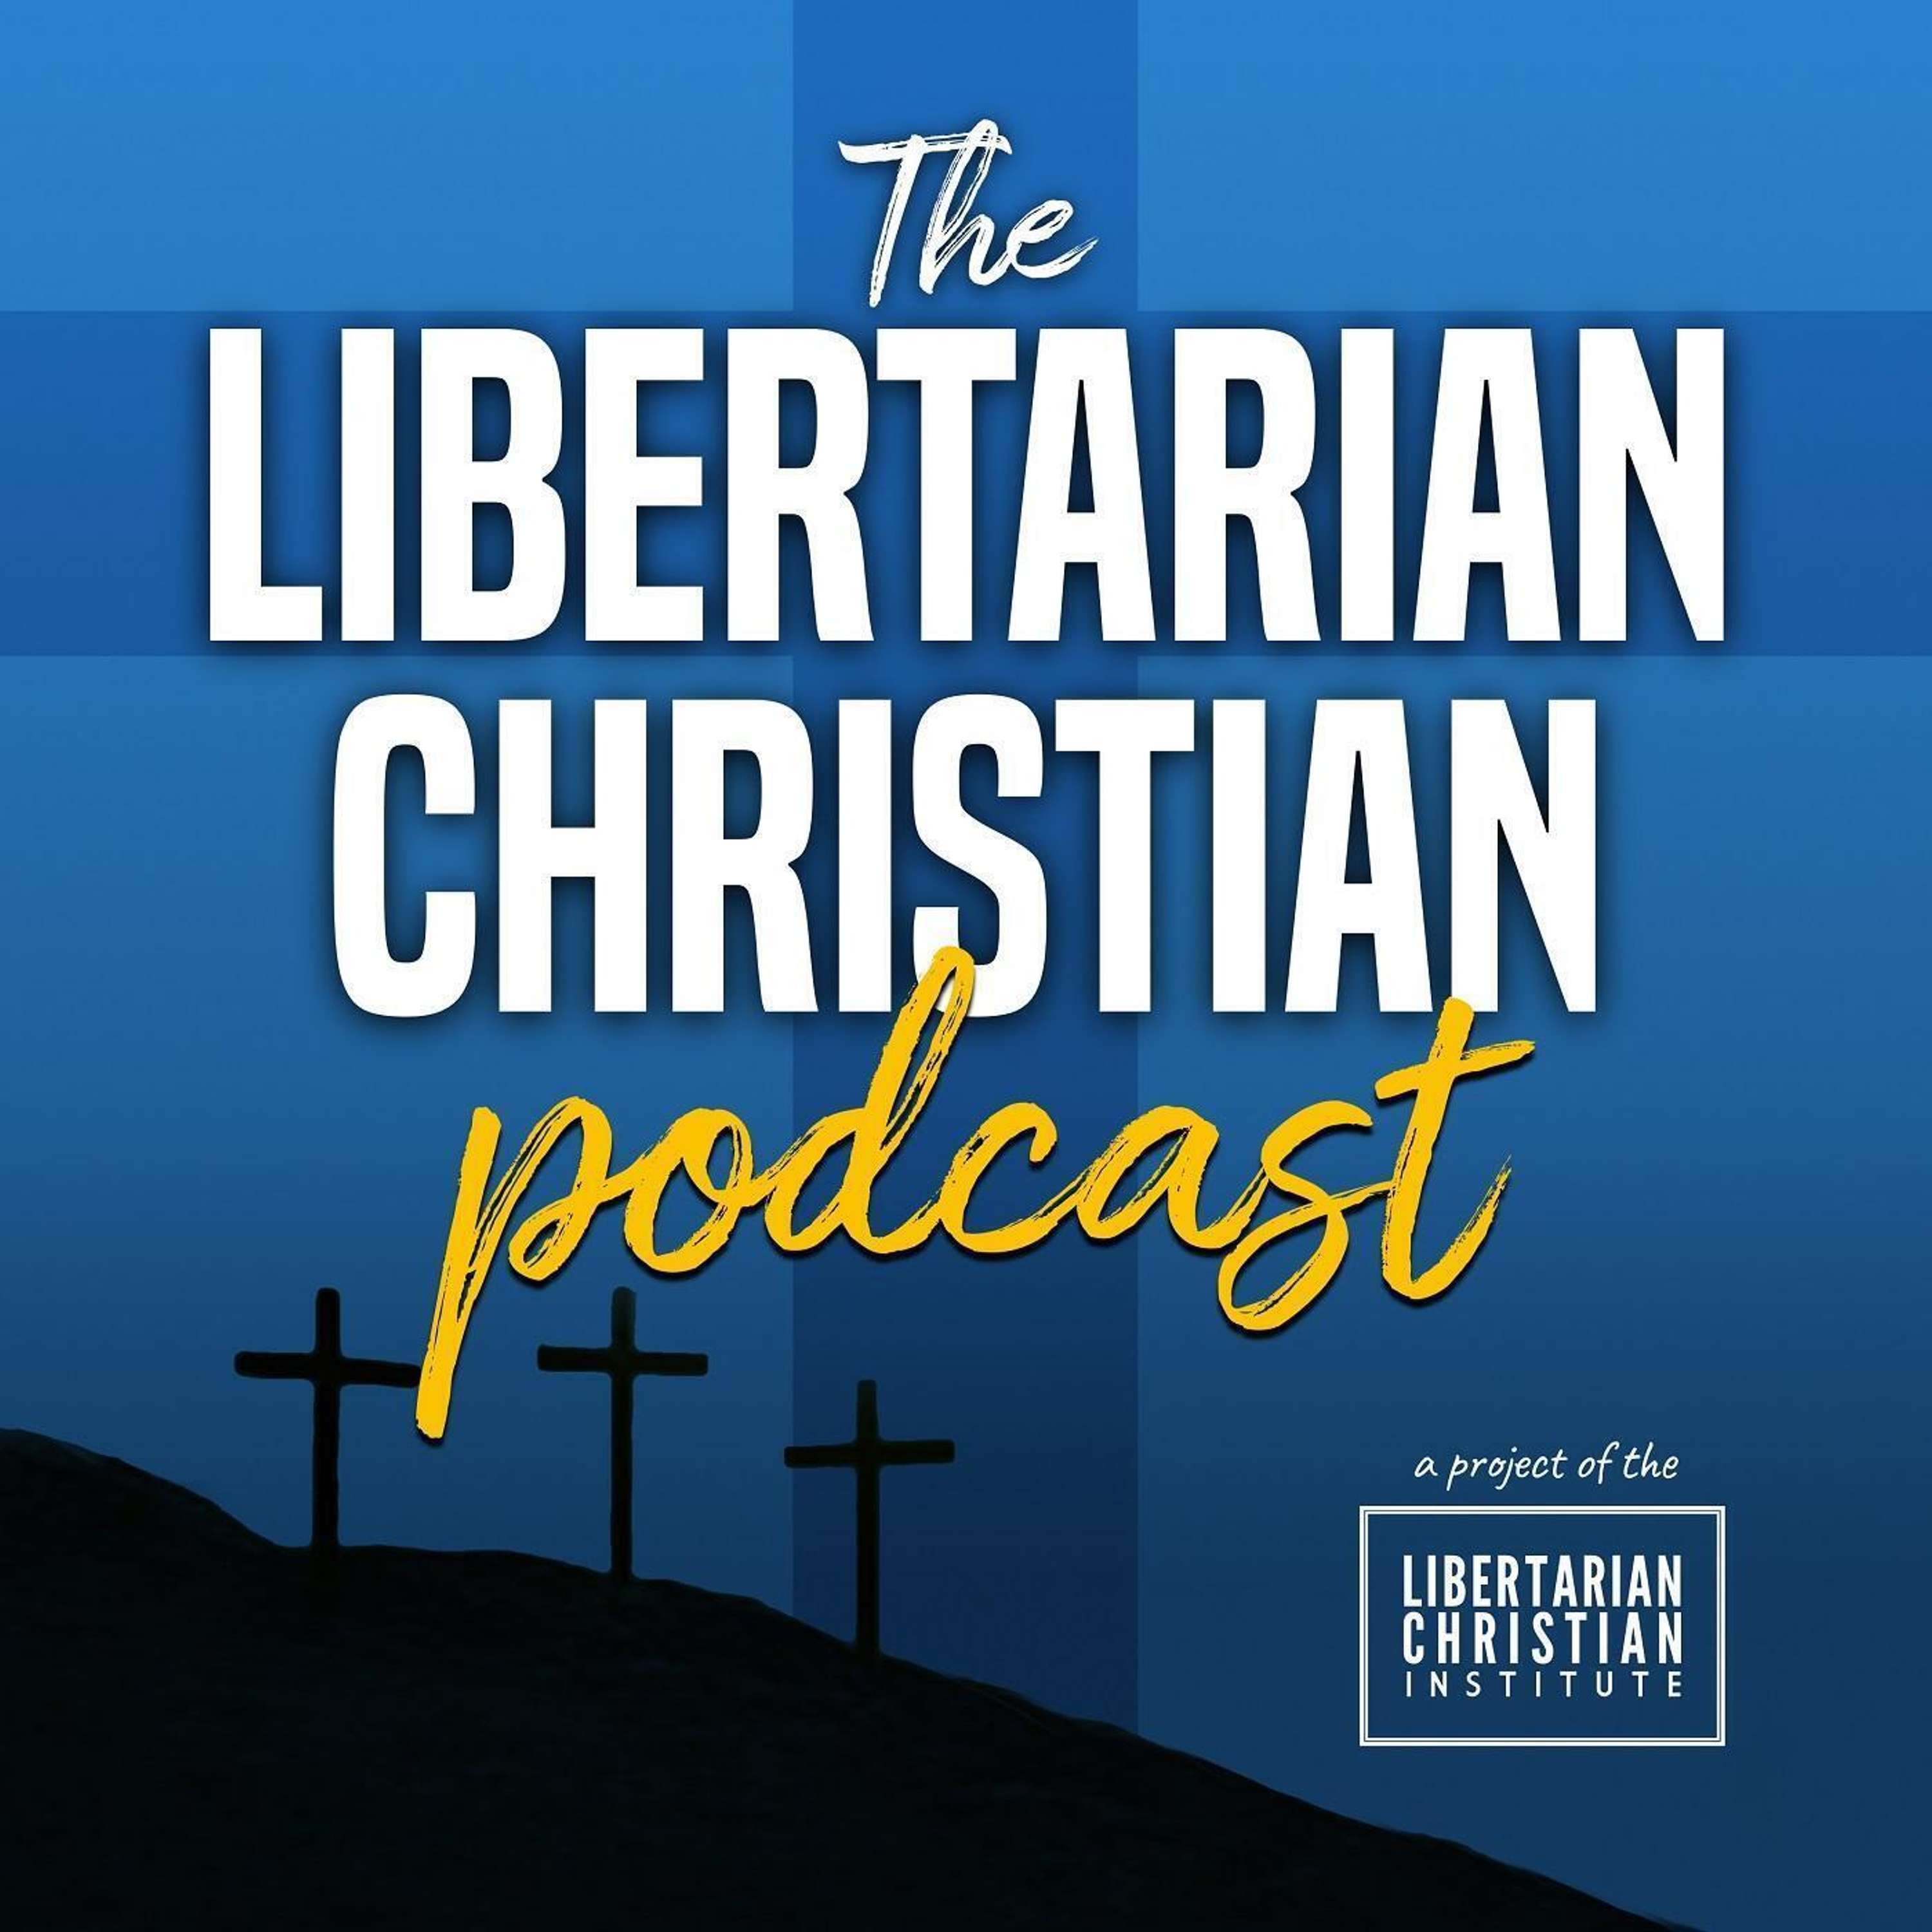 Re-Issue: Ep 55: Social Justice and Libertarianism, with Jason Jewell